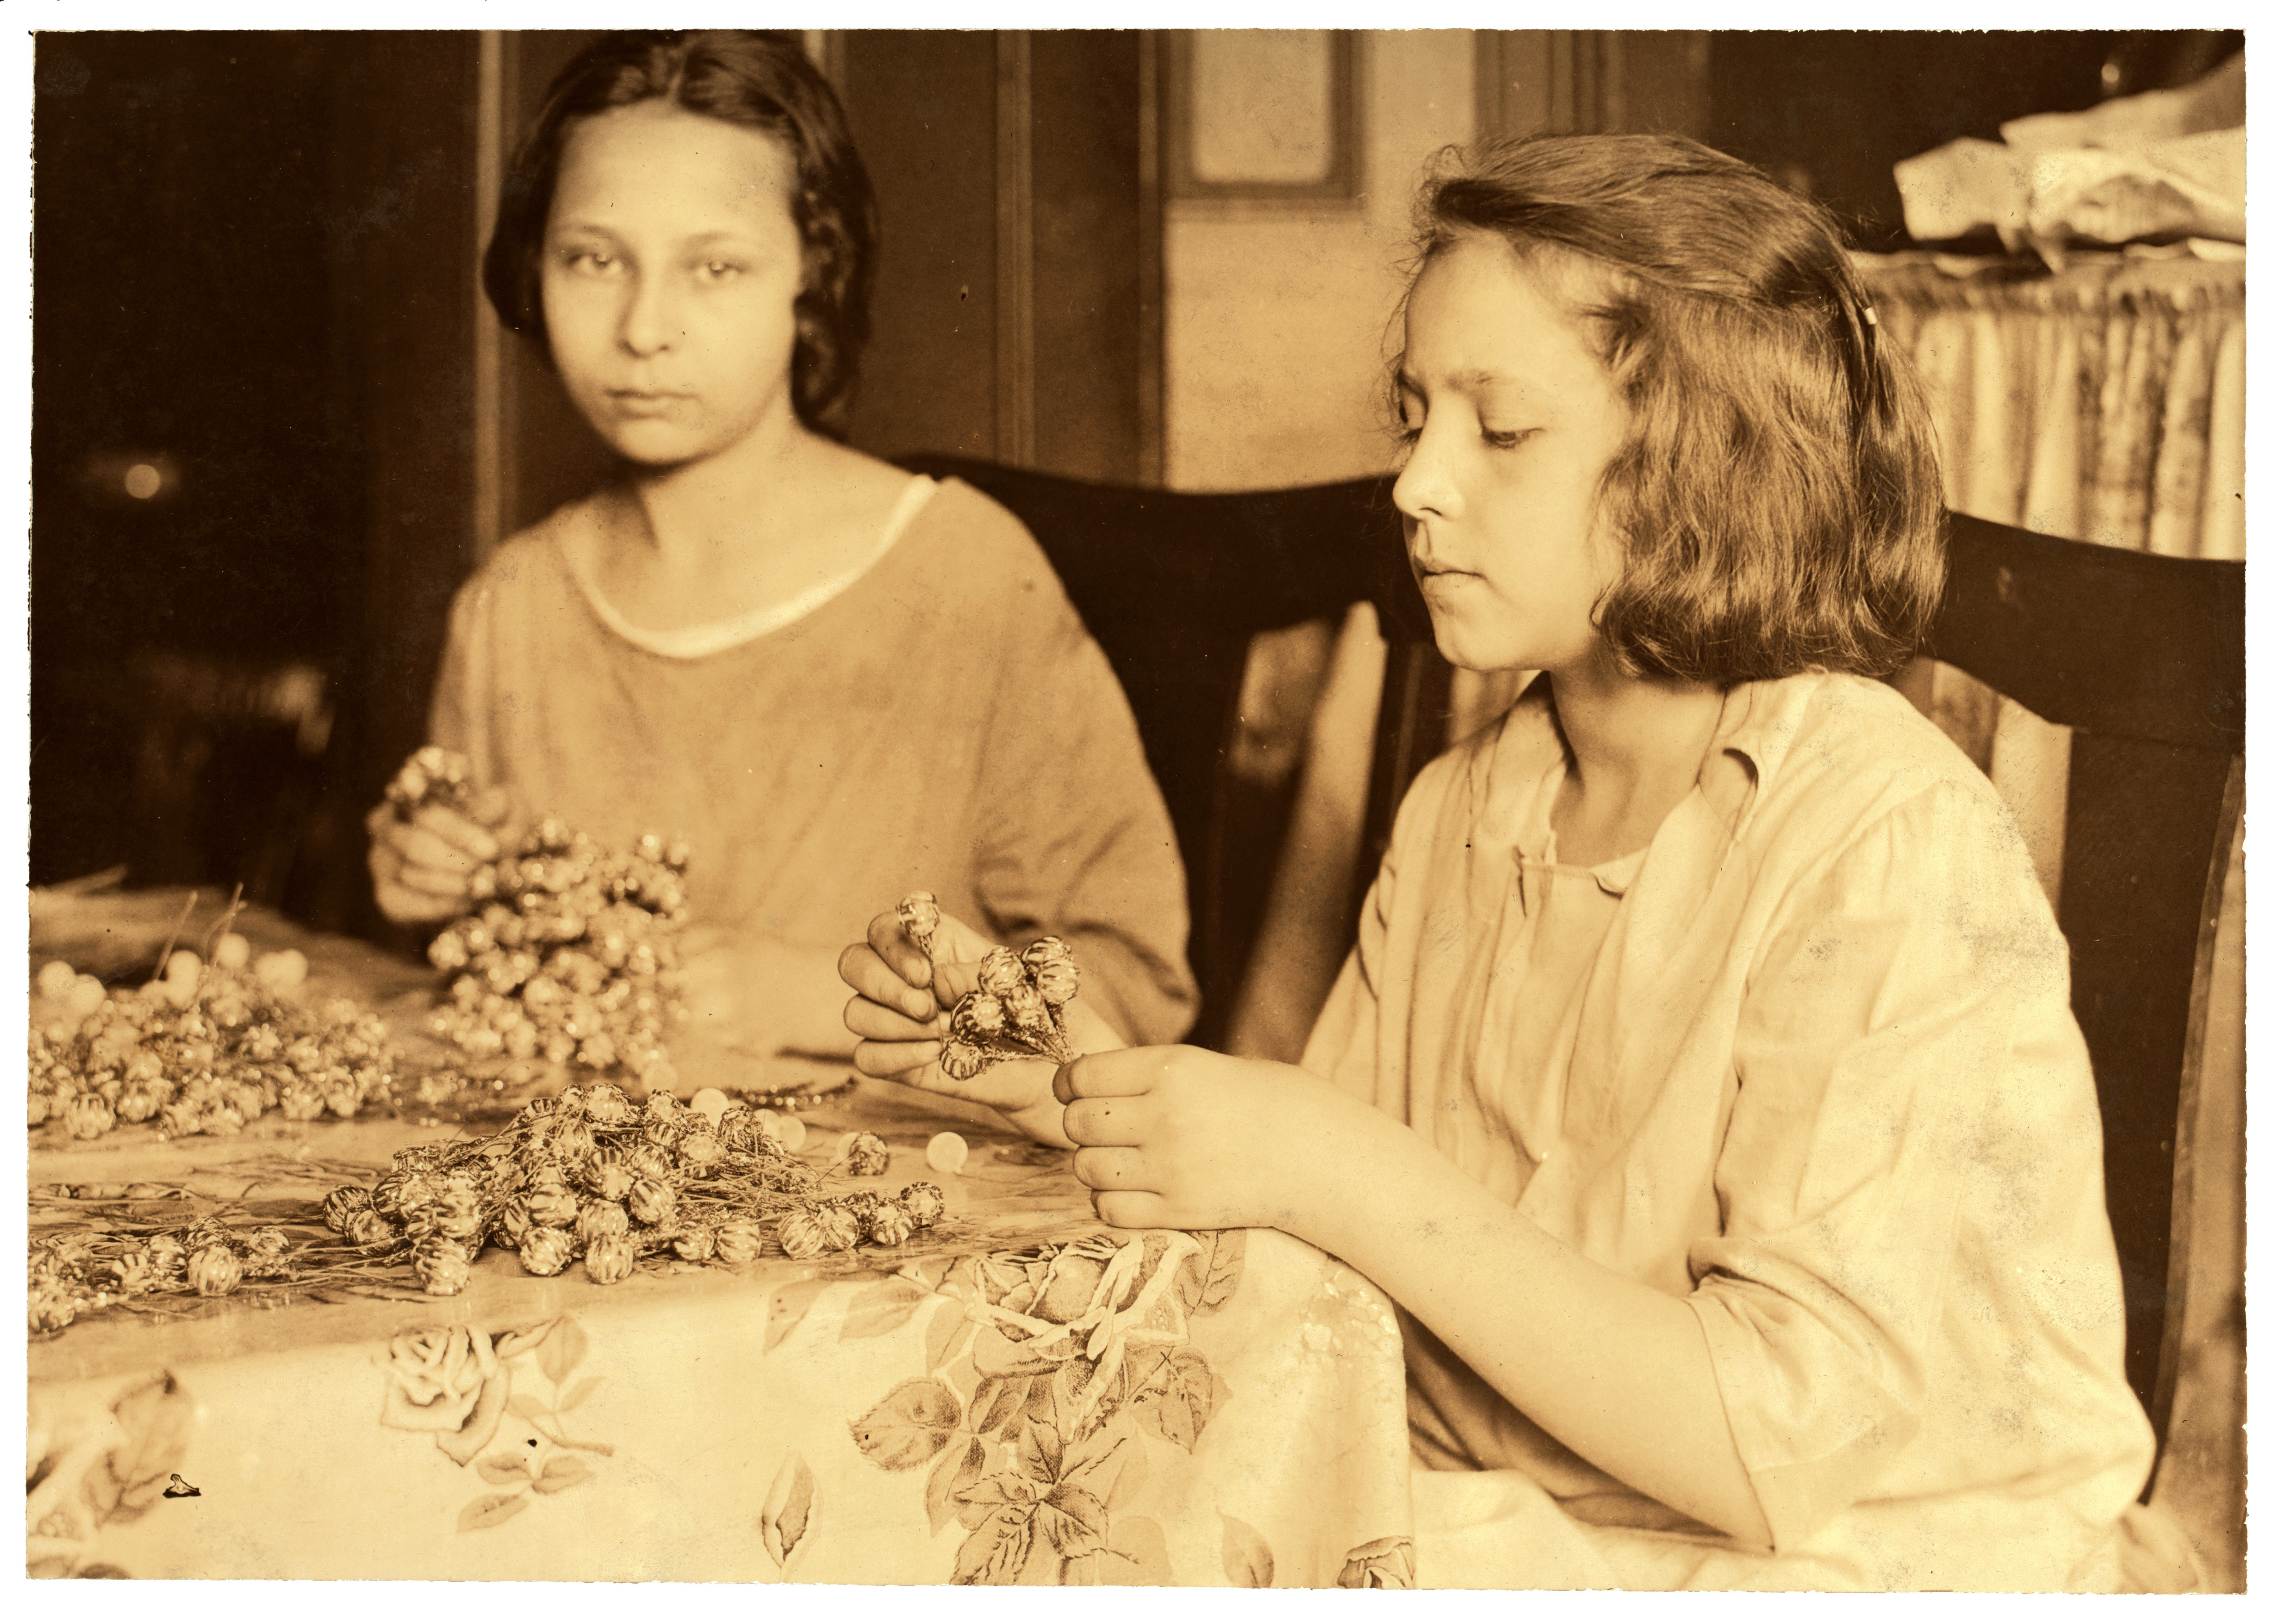 Lewis Hine, Two girls assembling paper flowers, New York, 1924